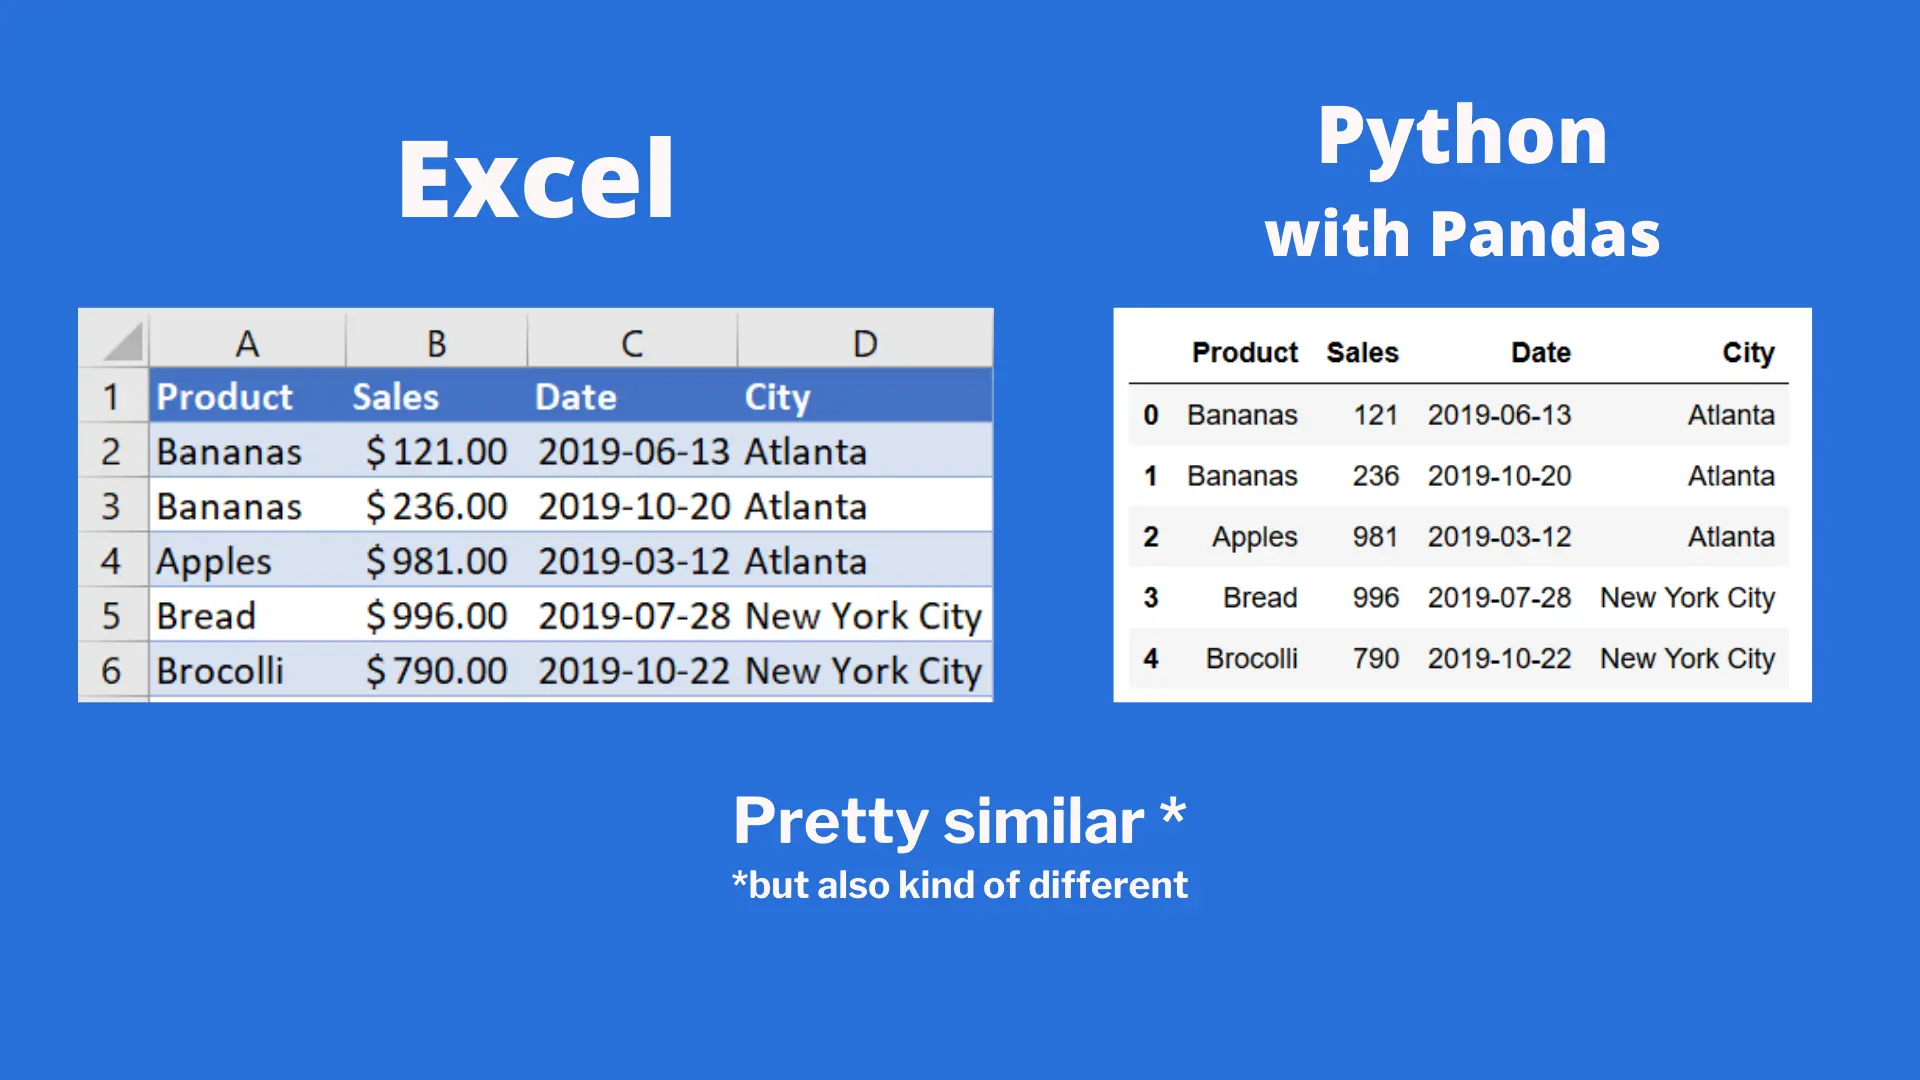 Comparing how data is displayed in Excel vs. Pandas